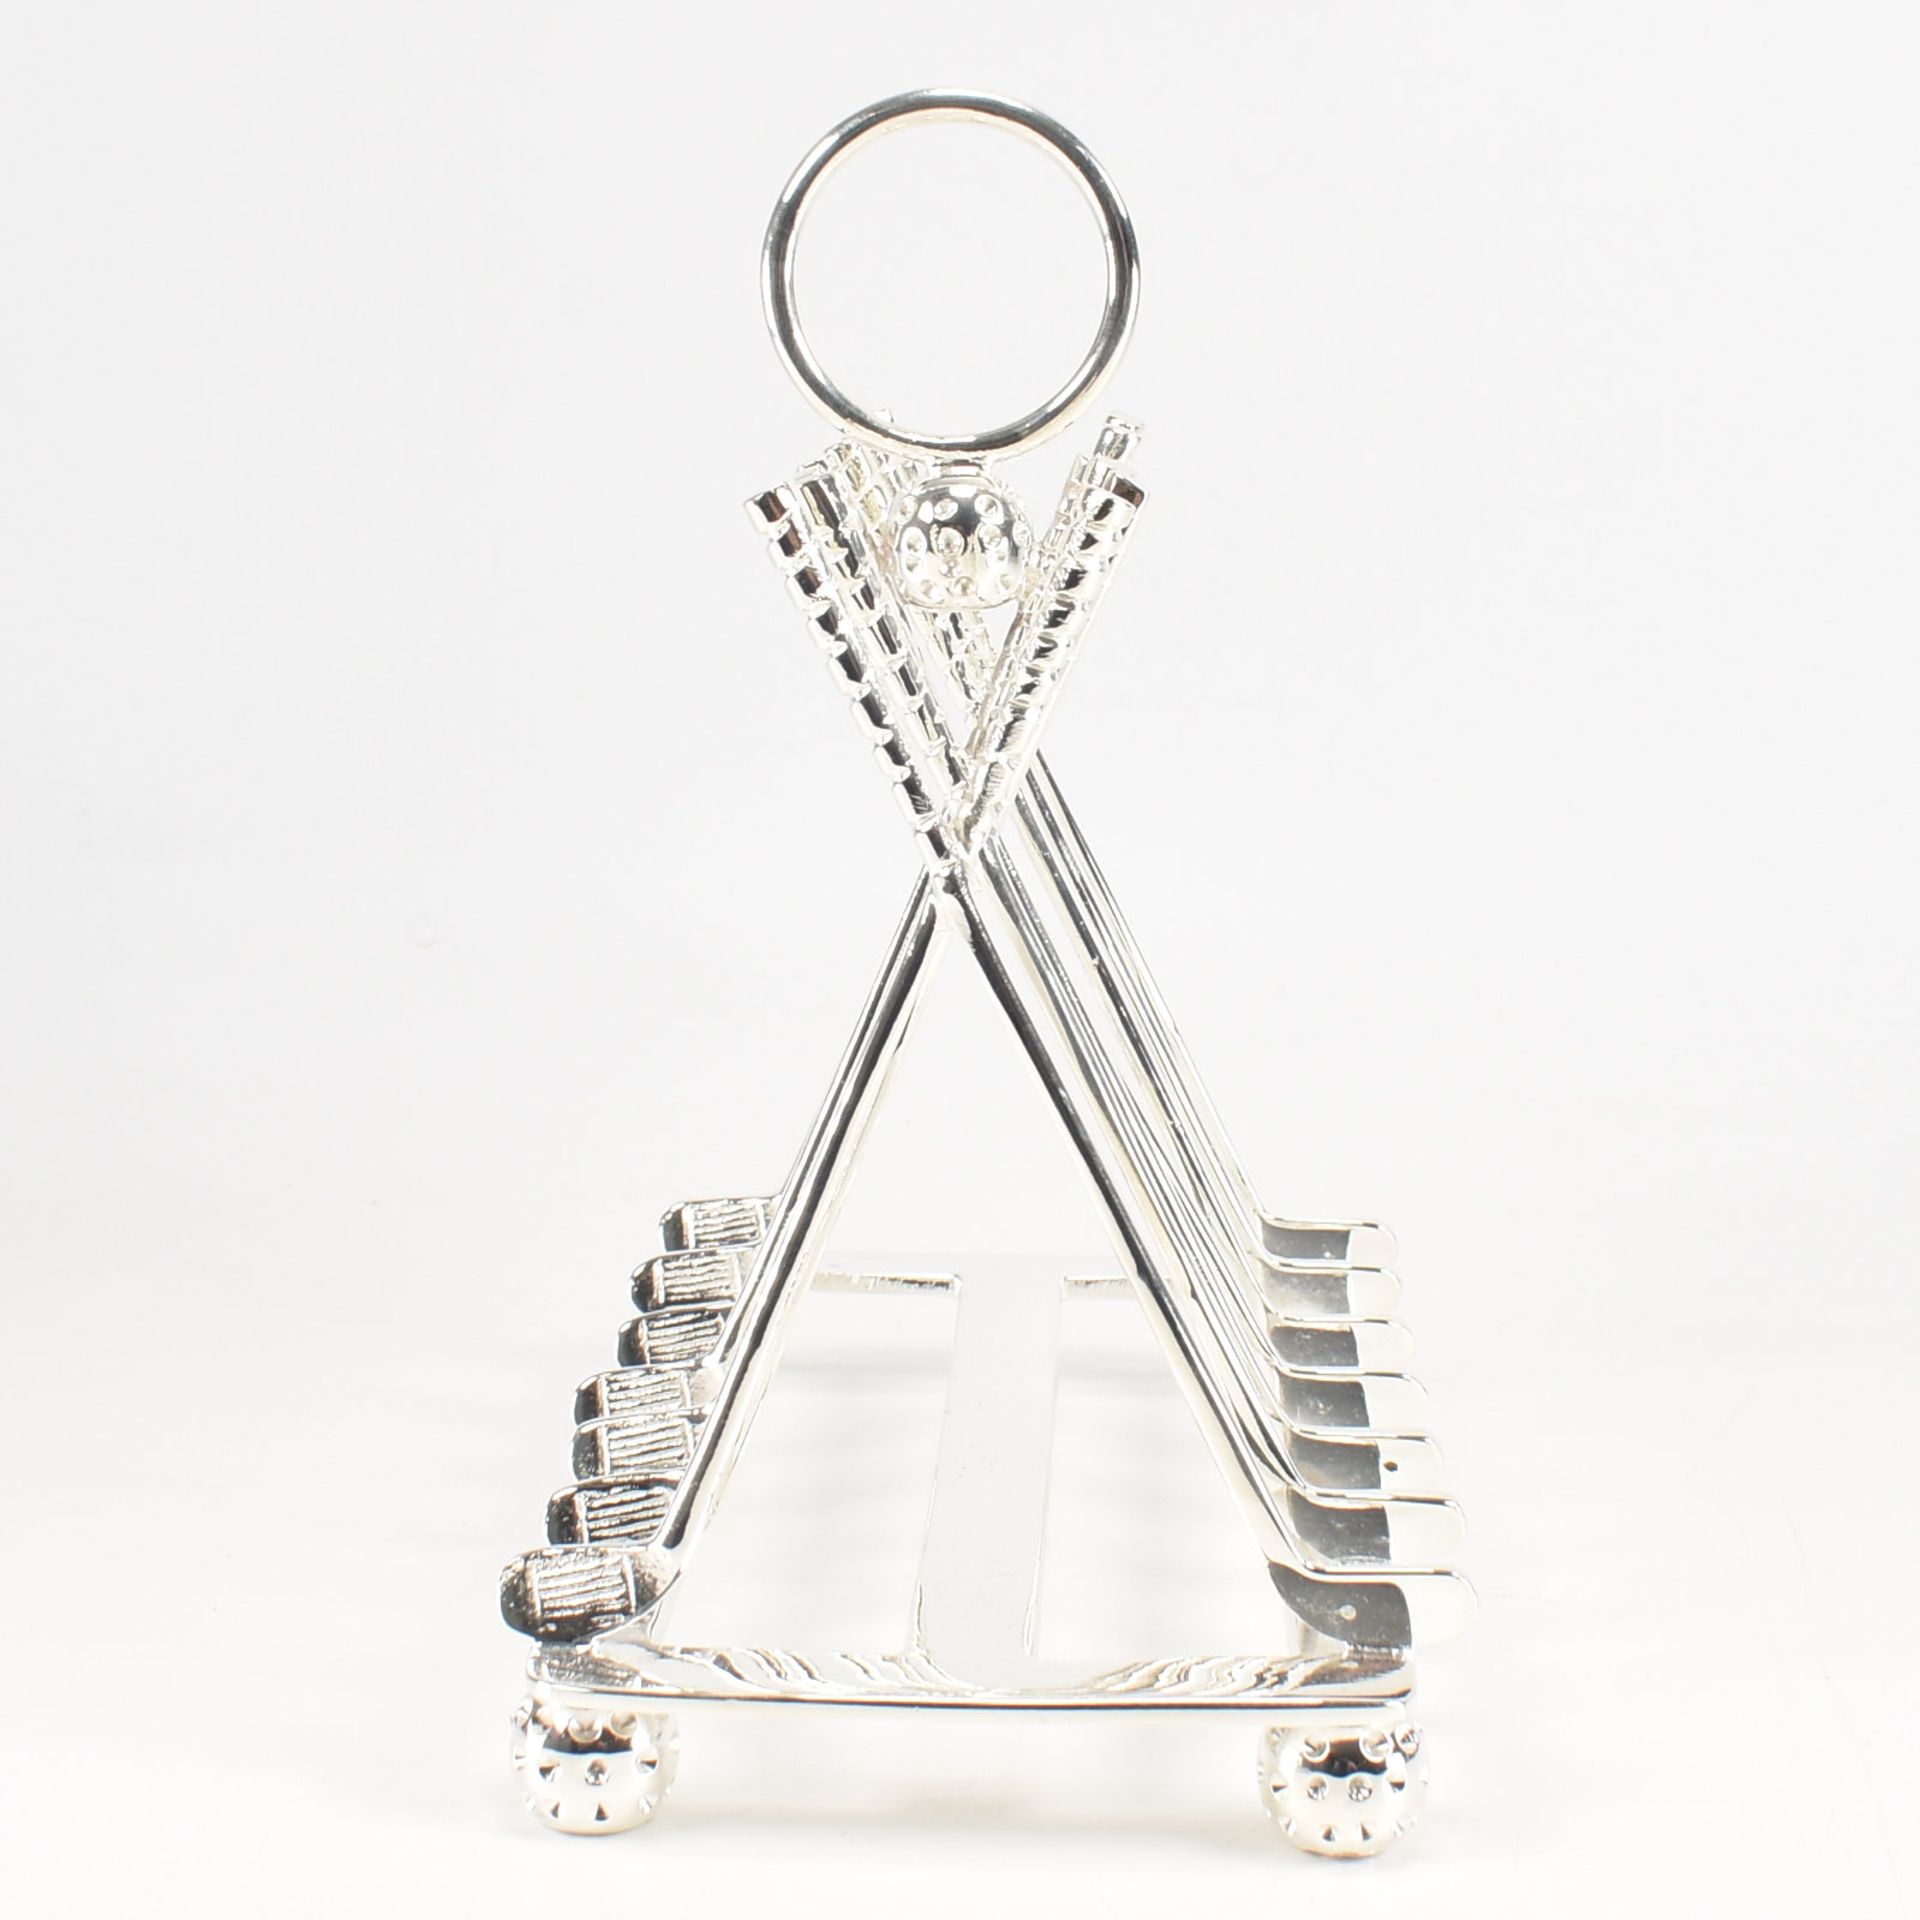 SILVER PLATED GOLFING TOAST RACK - Image 2 of 4